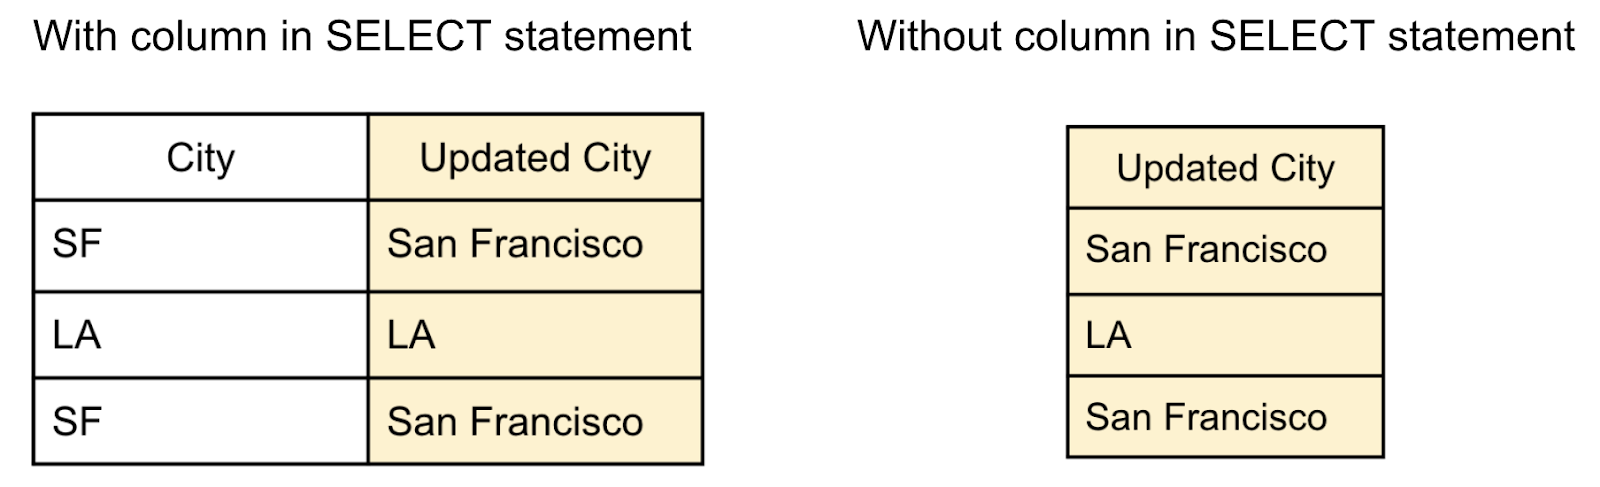 Image showing how the query results look with and without an additional column selected